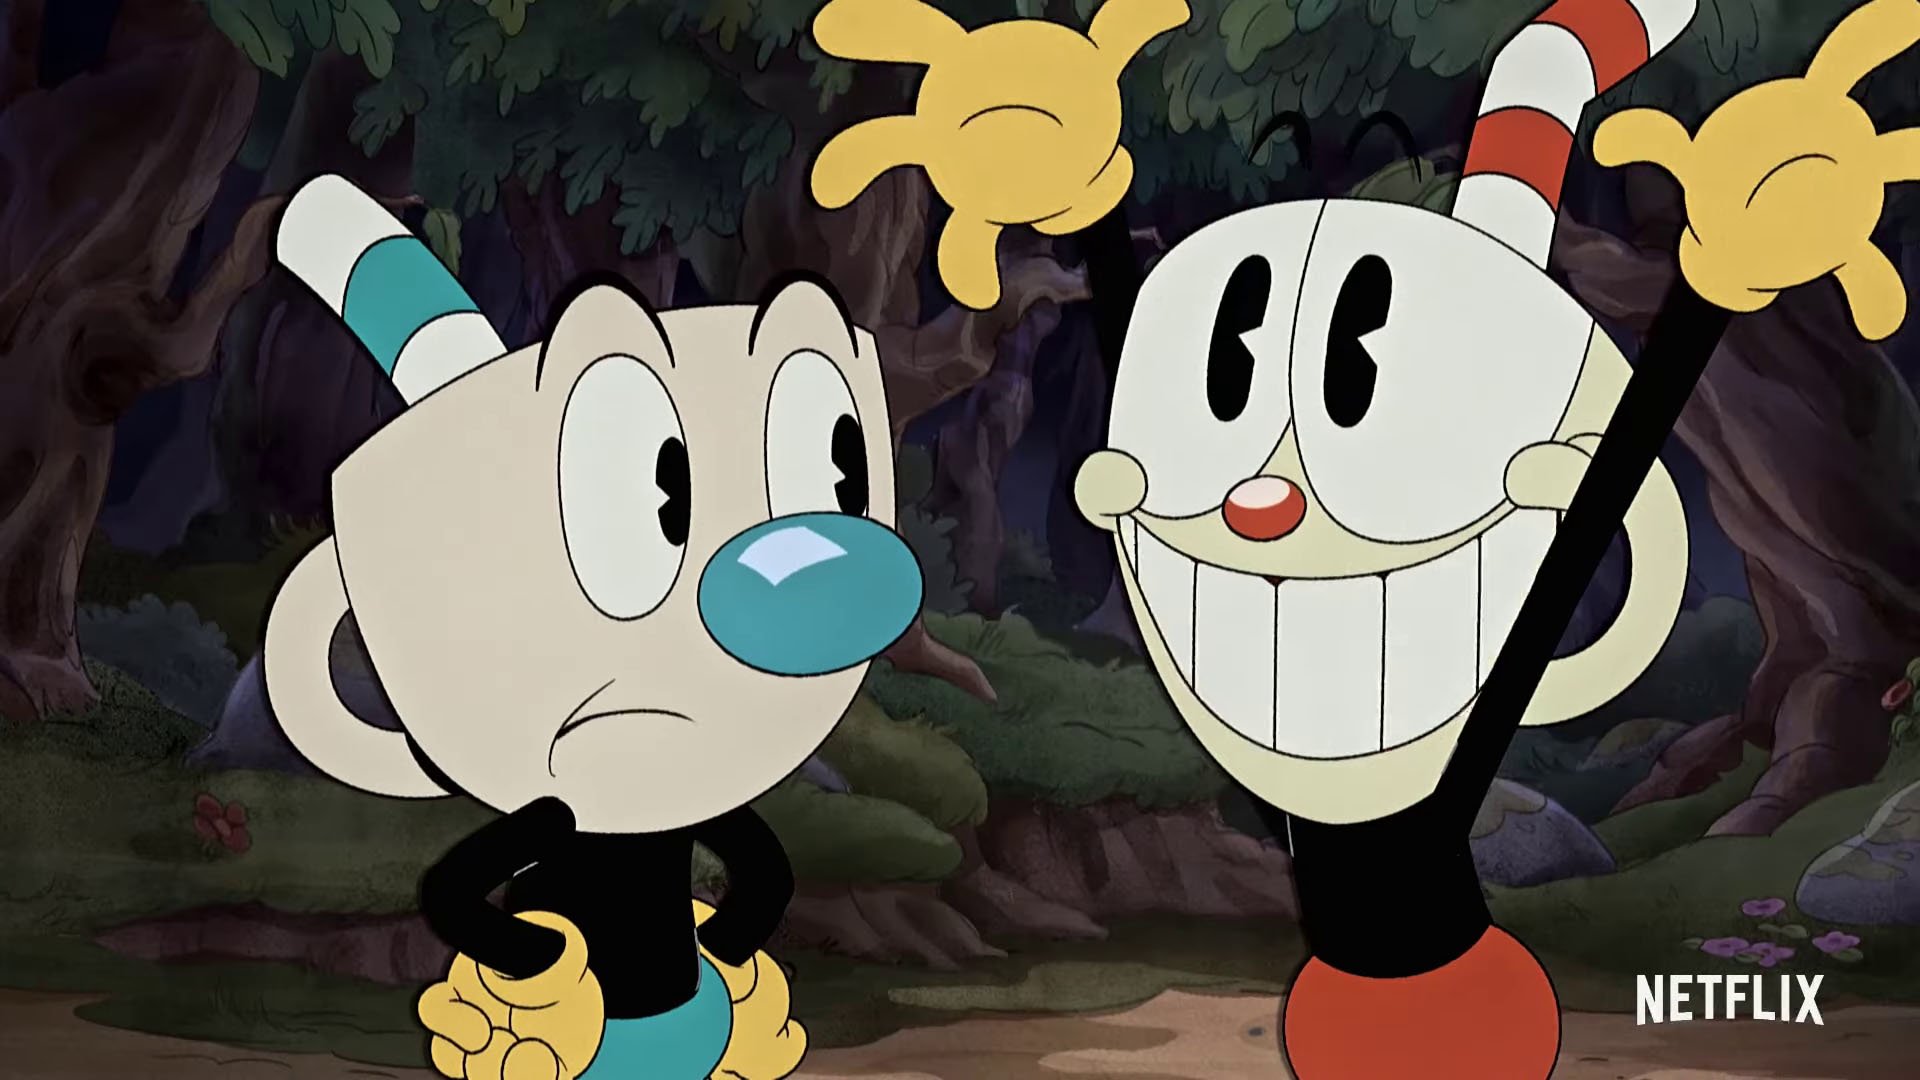 When Is the 'Cuphead' Animated Series Coming out on Netflix?